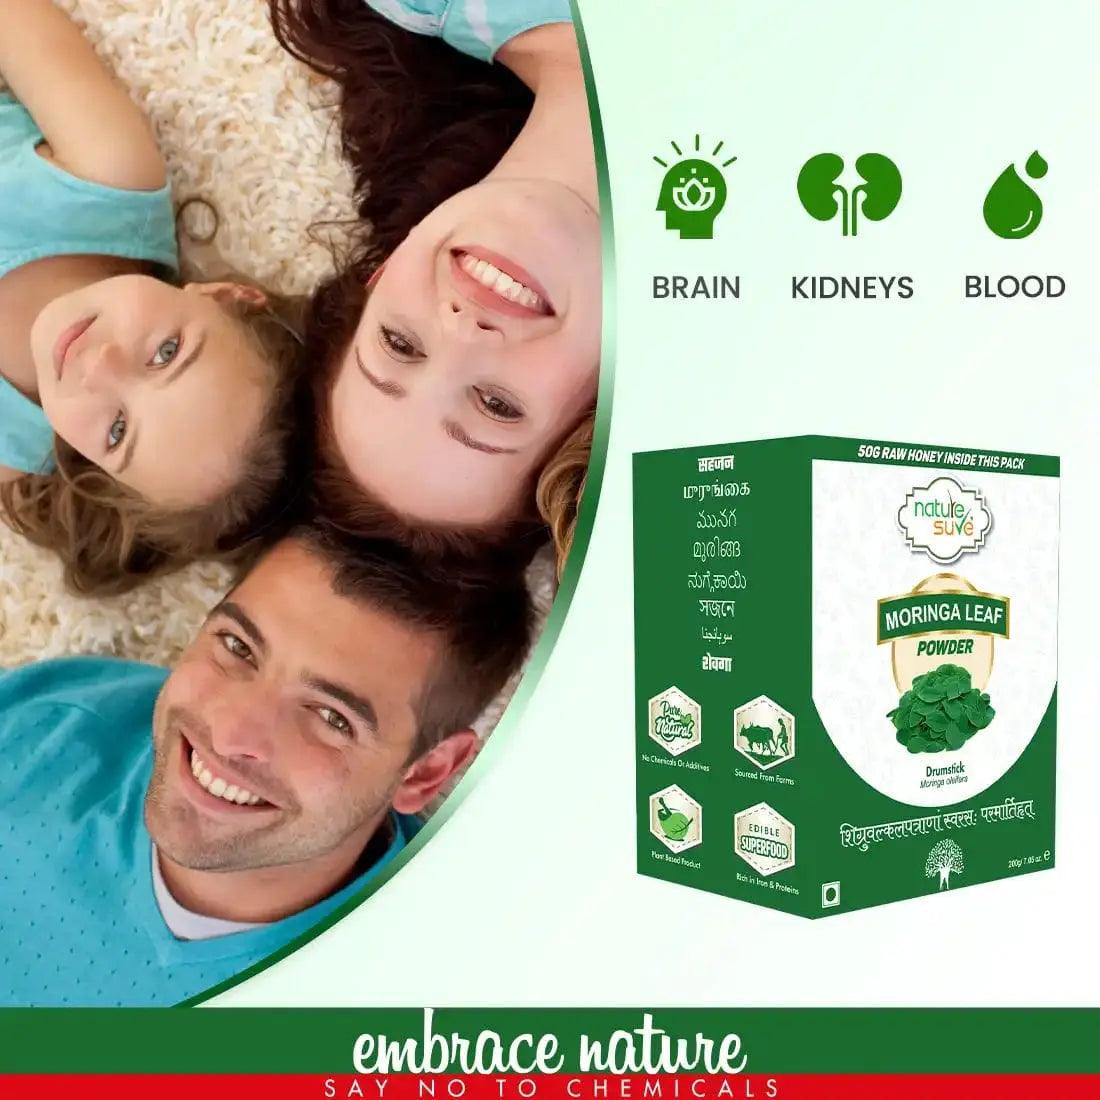 Nature Sure Moringa Leaf Powder is a superfood that is good for brain, kidneys and blood